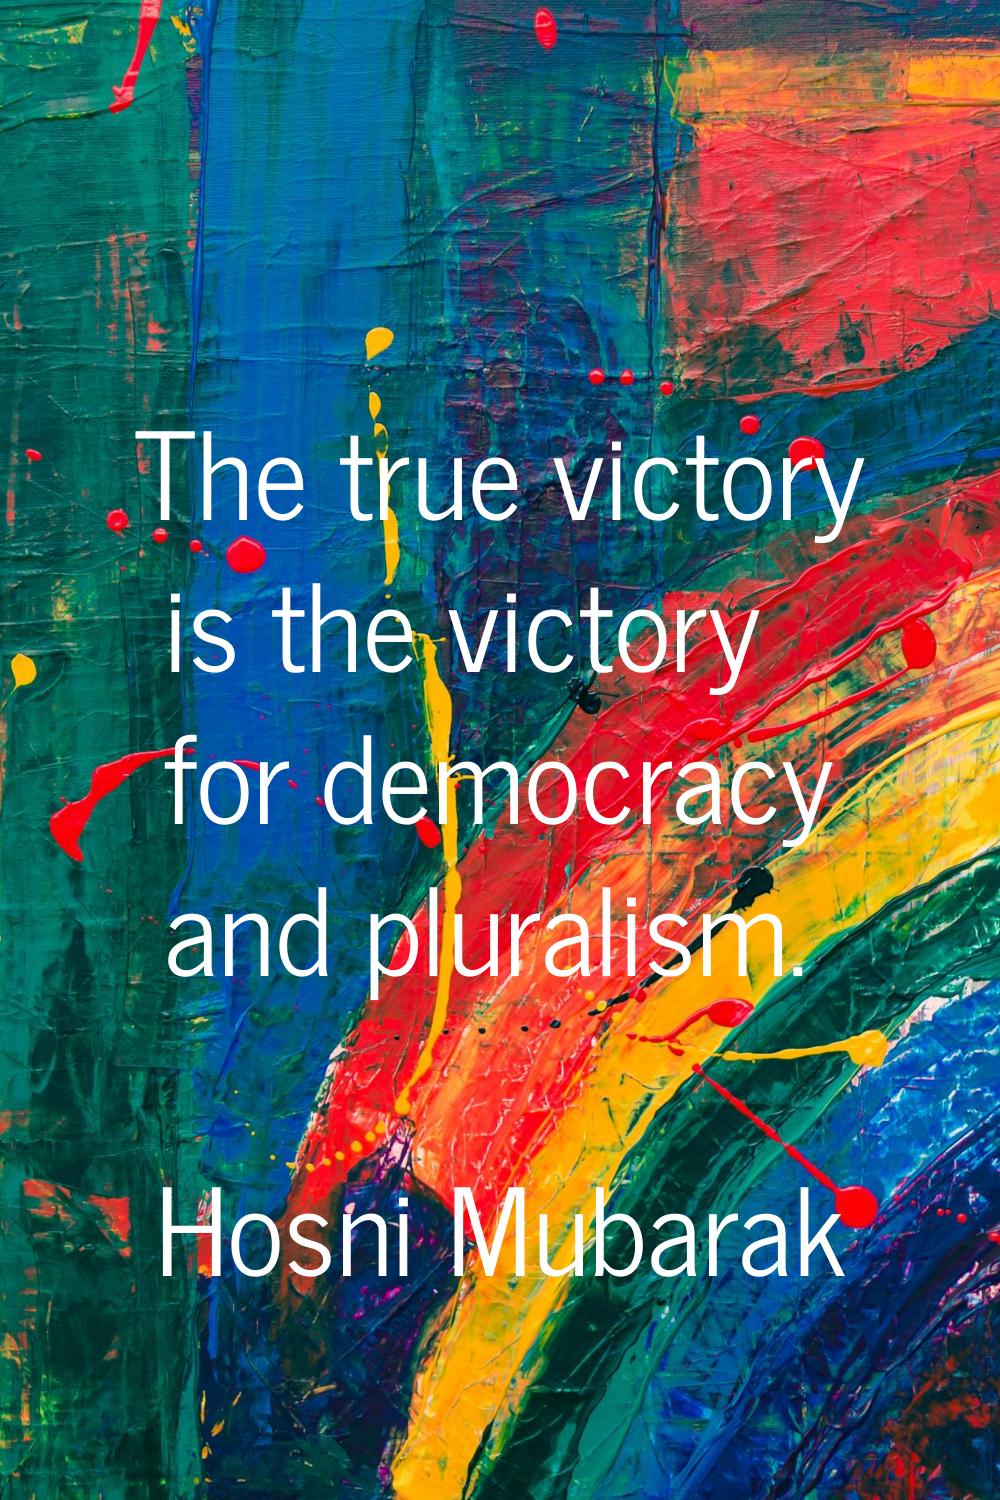 The true victory is the victory for democracy and pluralism.